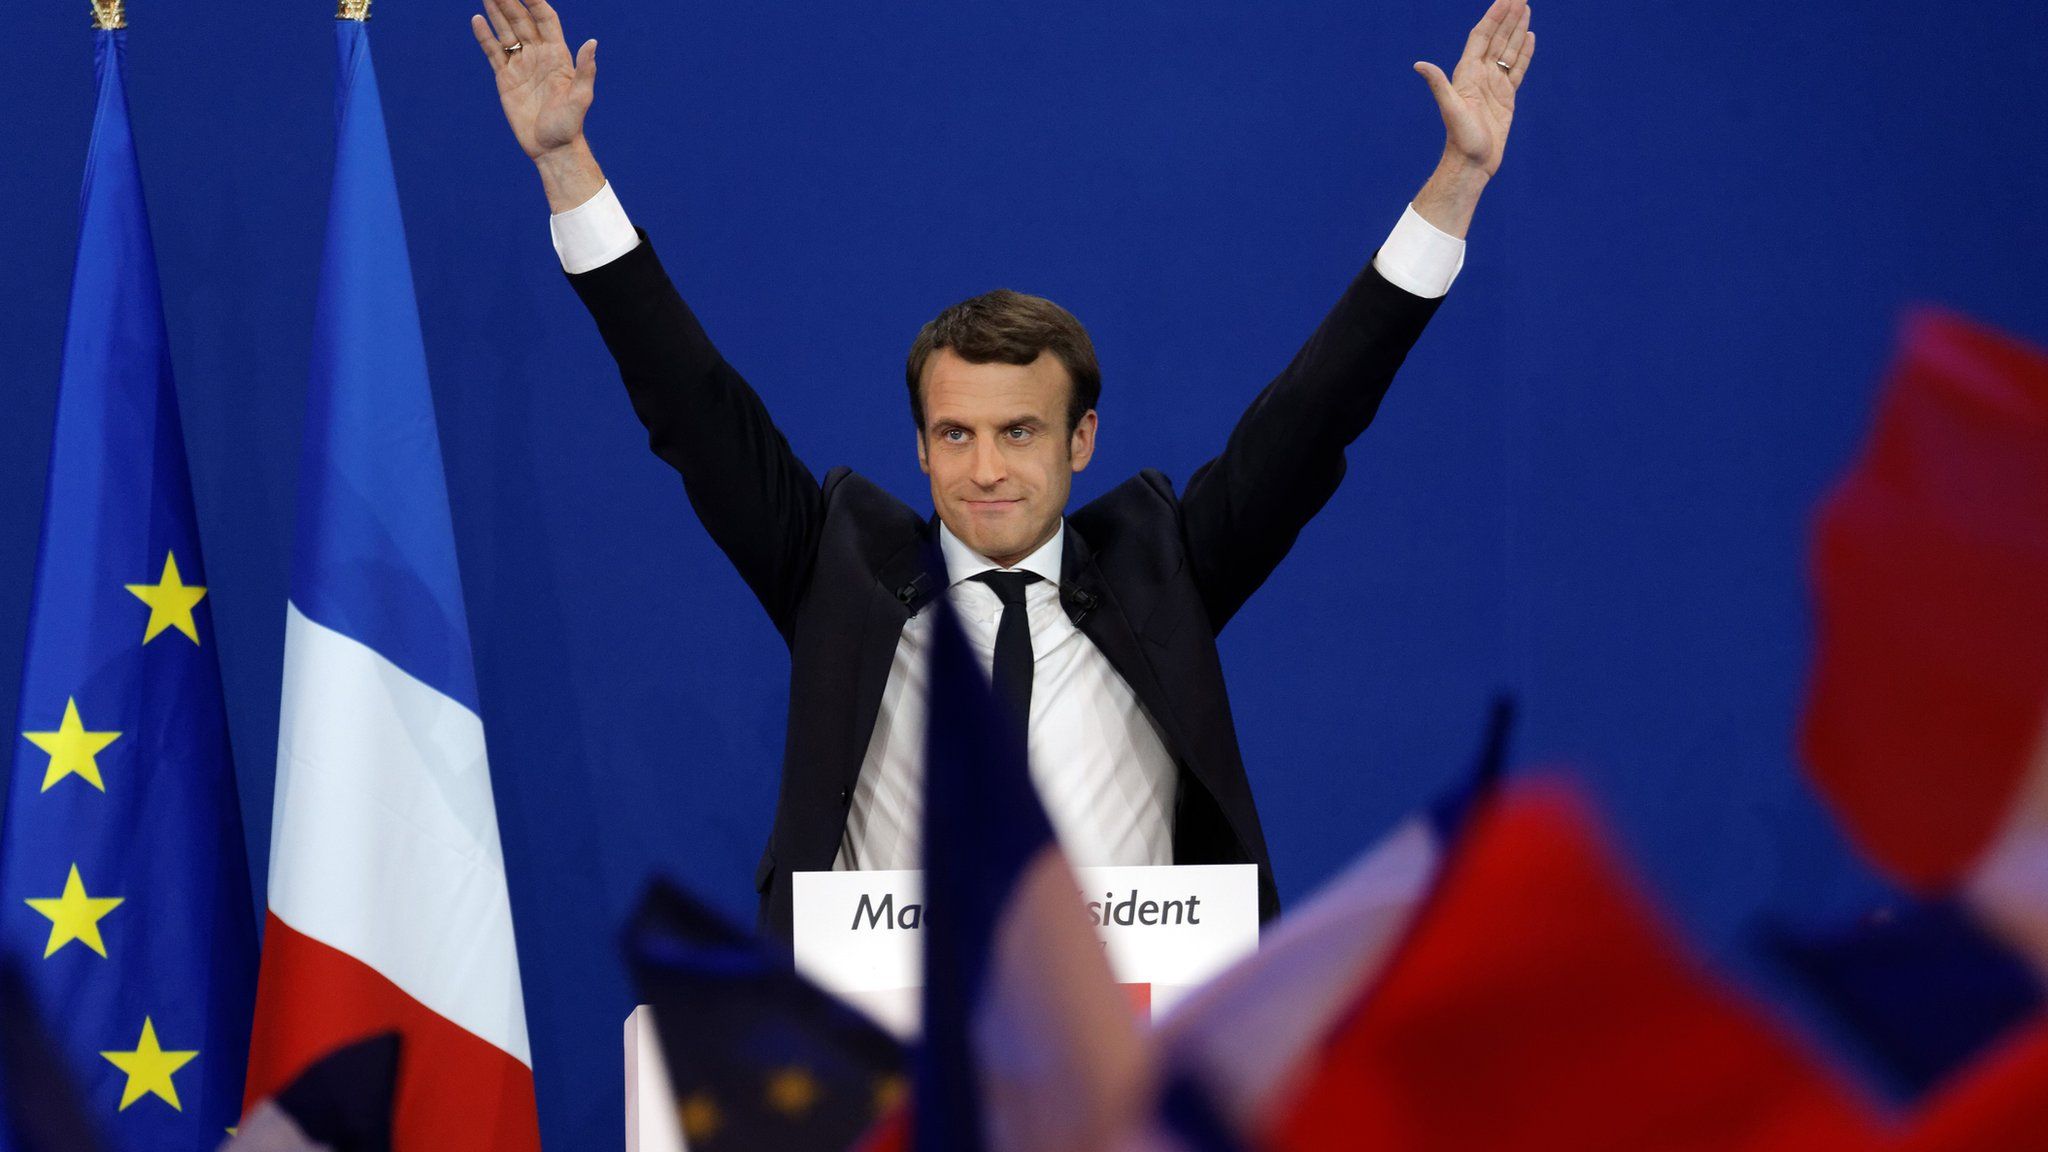 Emmanuel Macron addresses supporters at a rally